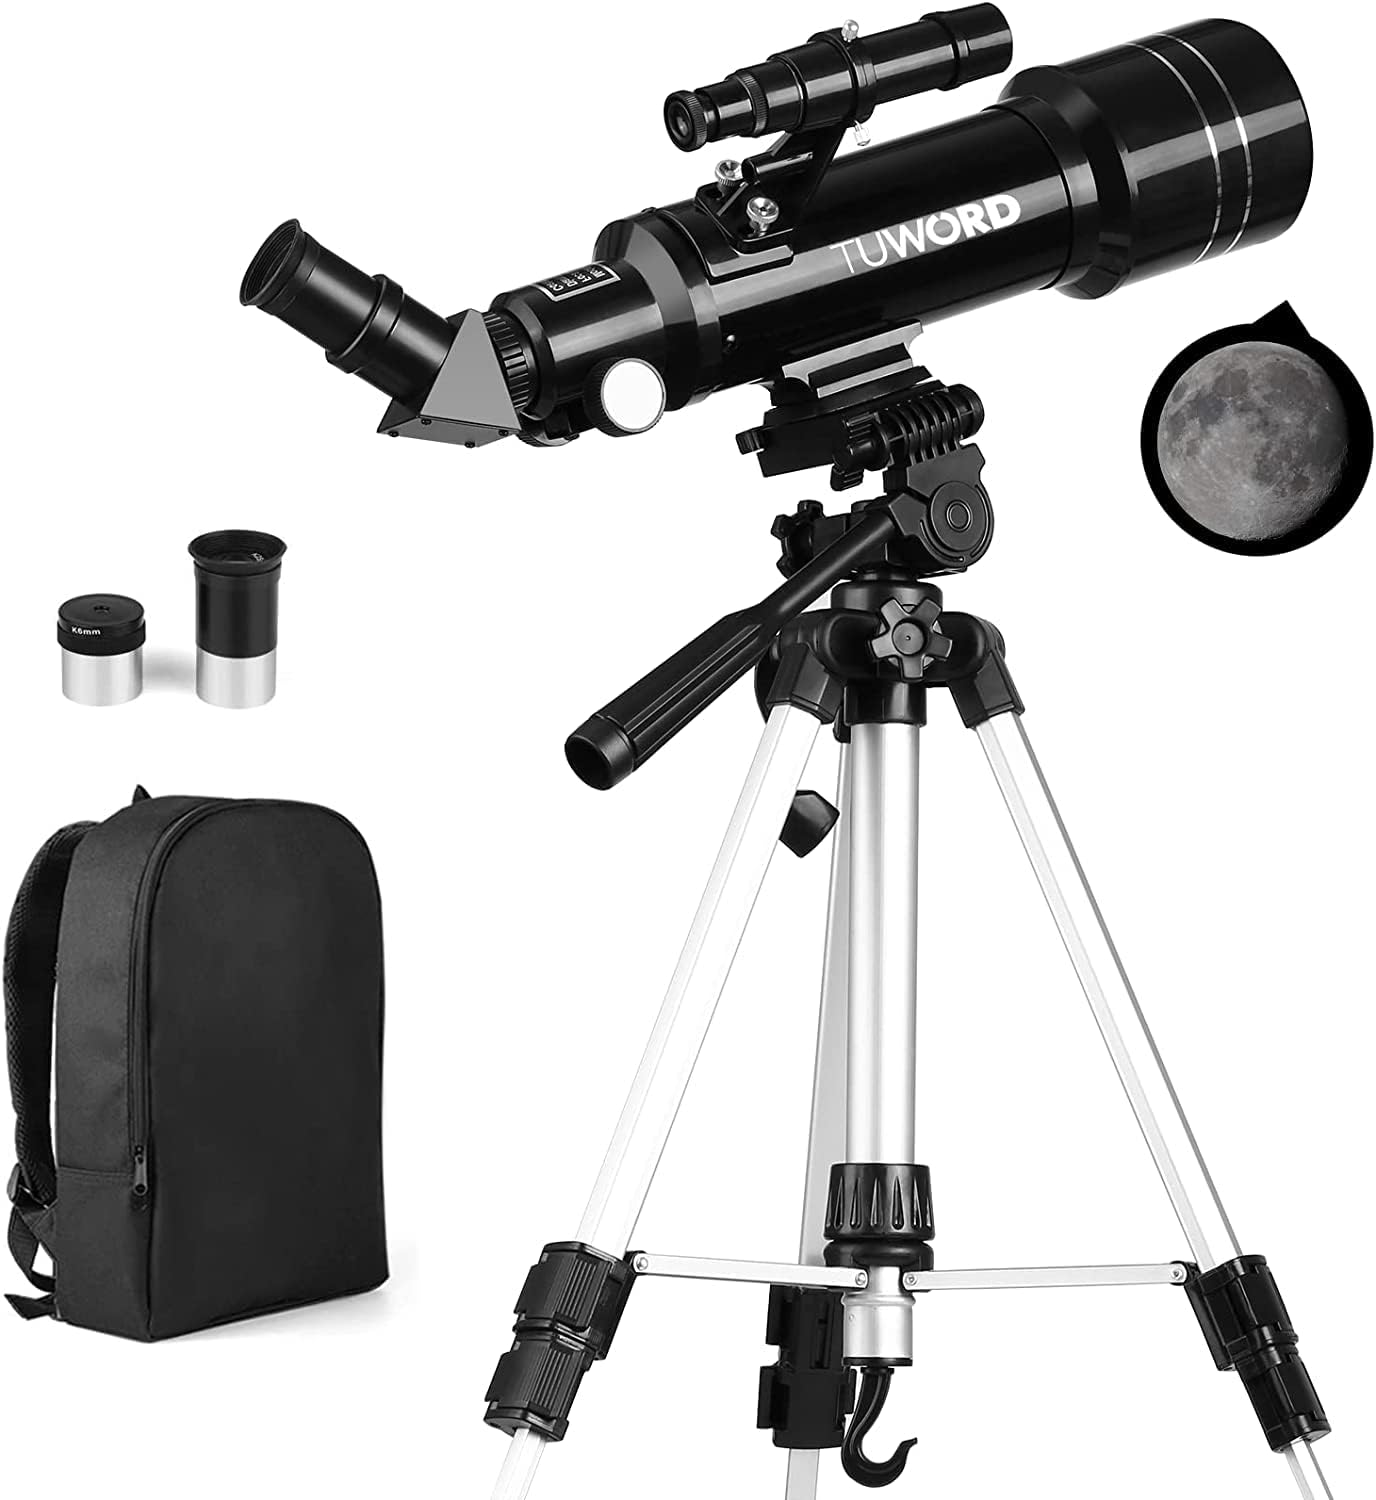 Tuword Astronomical Telescope, Pro 400/70 FMC Refractor Telescopes with Adjustable Tripod Finder Compass Portable Travel Telescope Perfect Portable Scope for Adult Children Teens